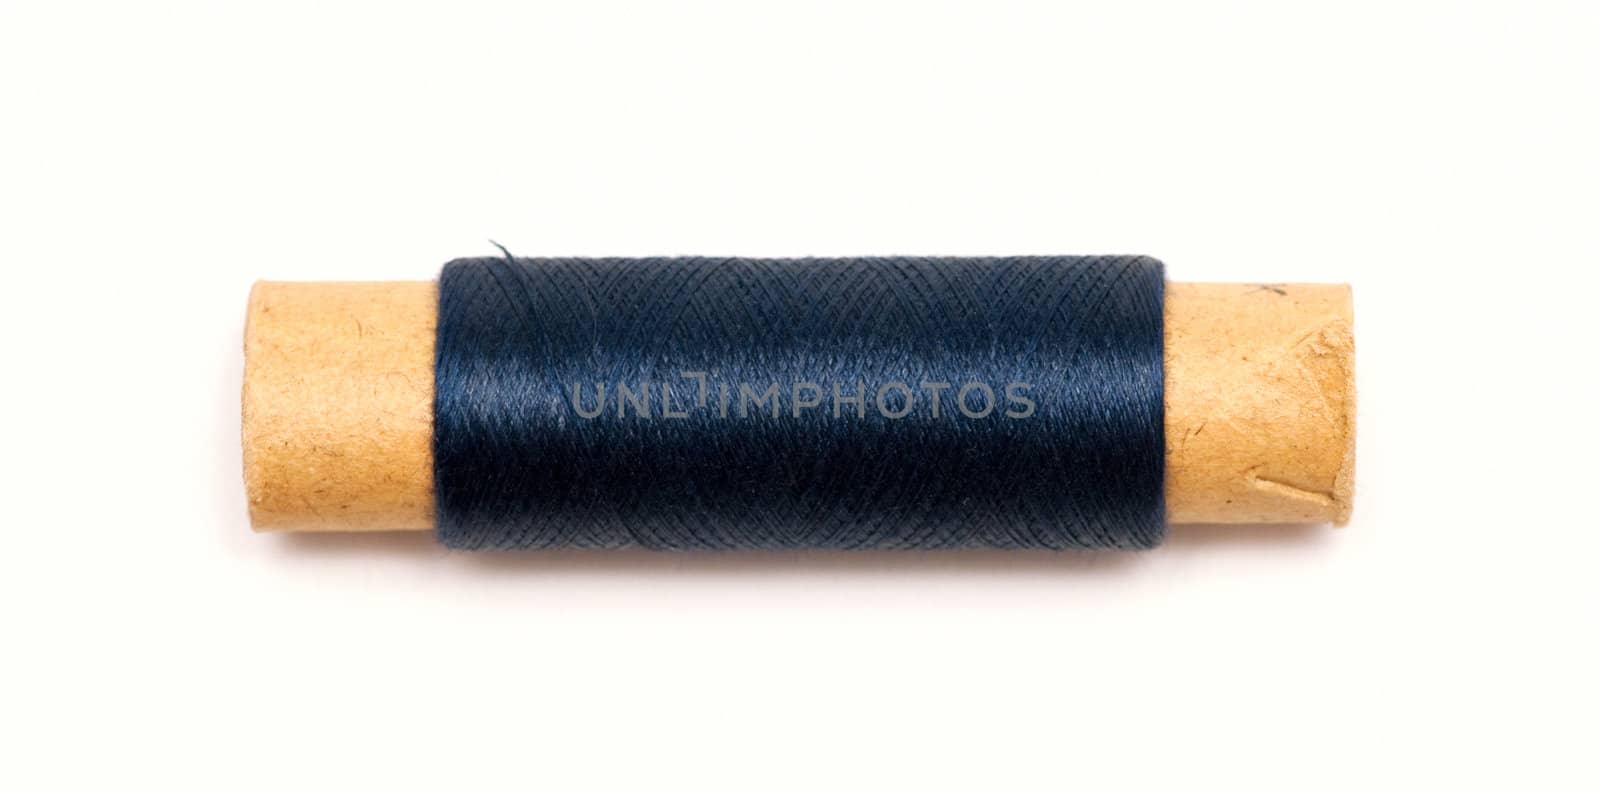 spool of thread isolated on a white background by DNKSTUDIO